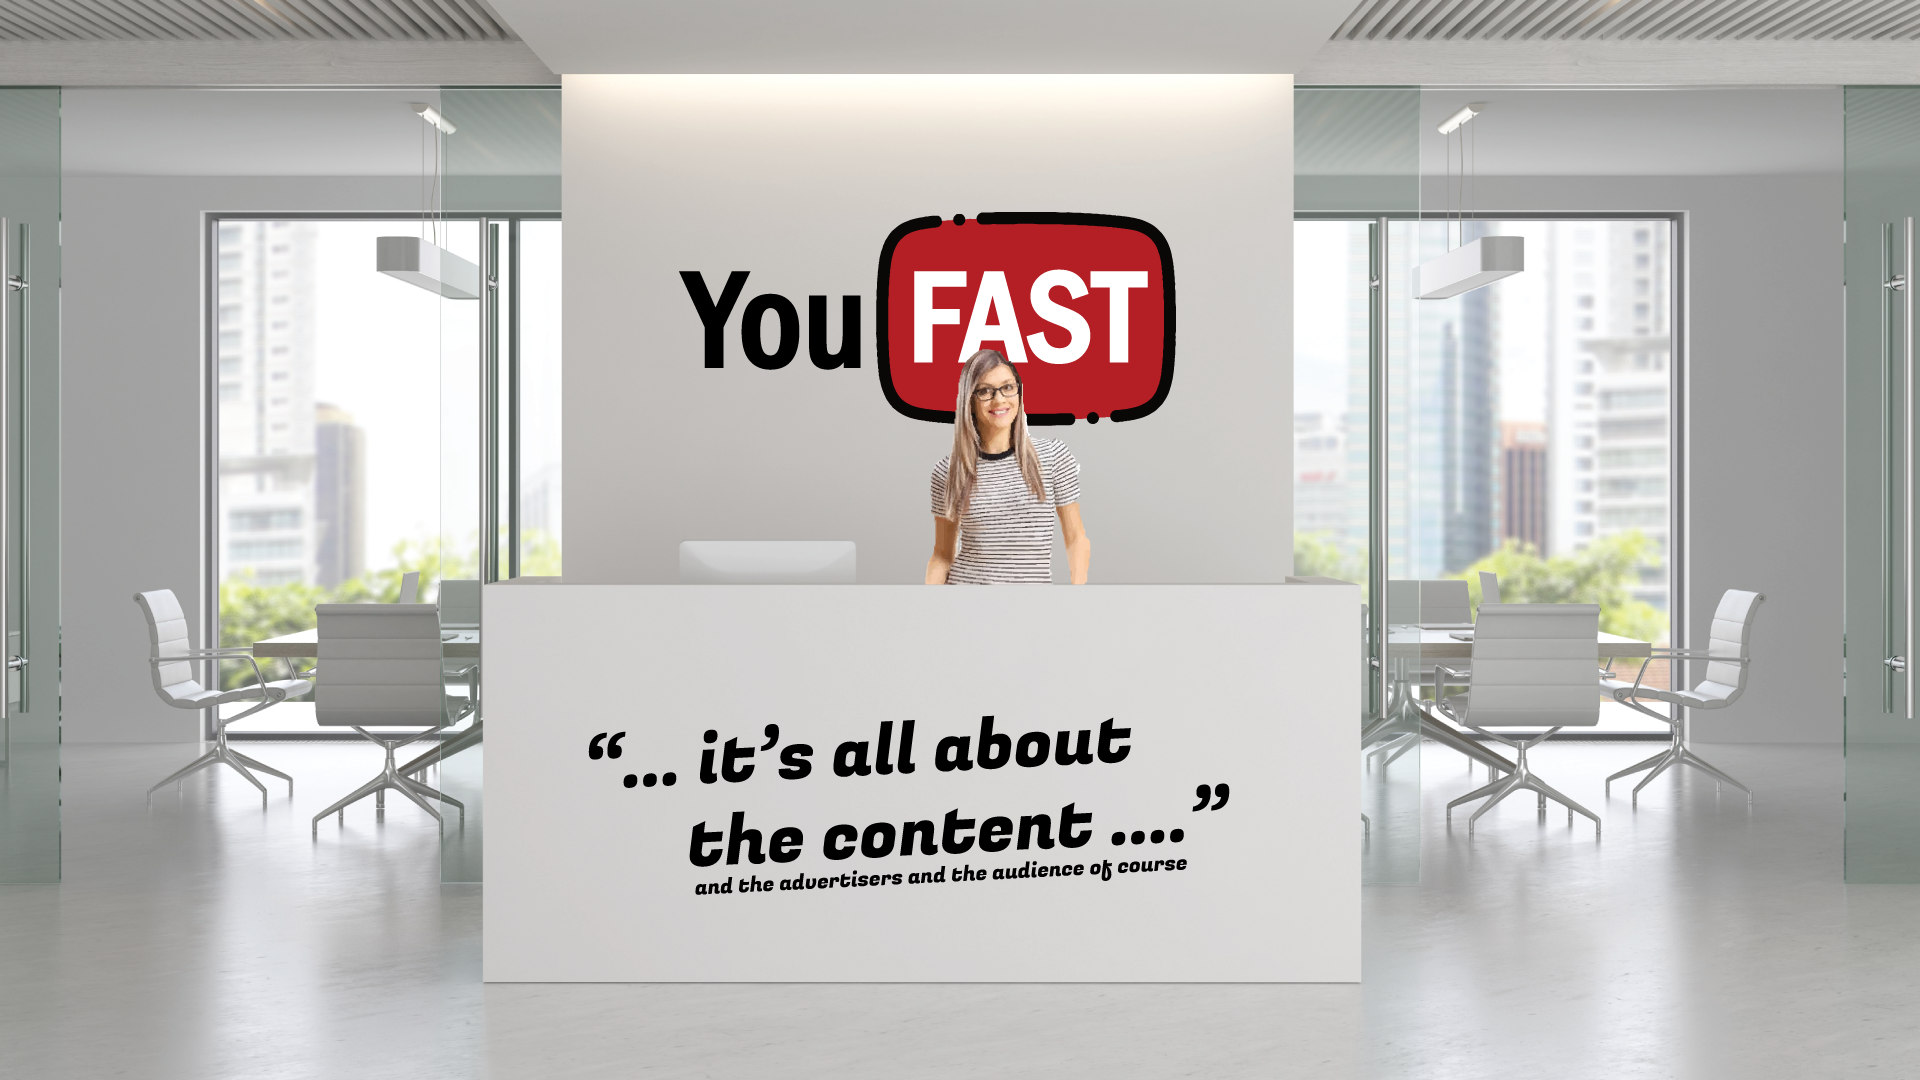 YouFAST – A proven solution for Integrating Broadcasters, Streaming TV and Content Studios into one sustainable platform.